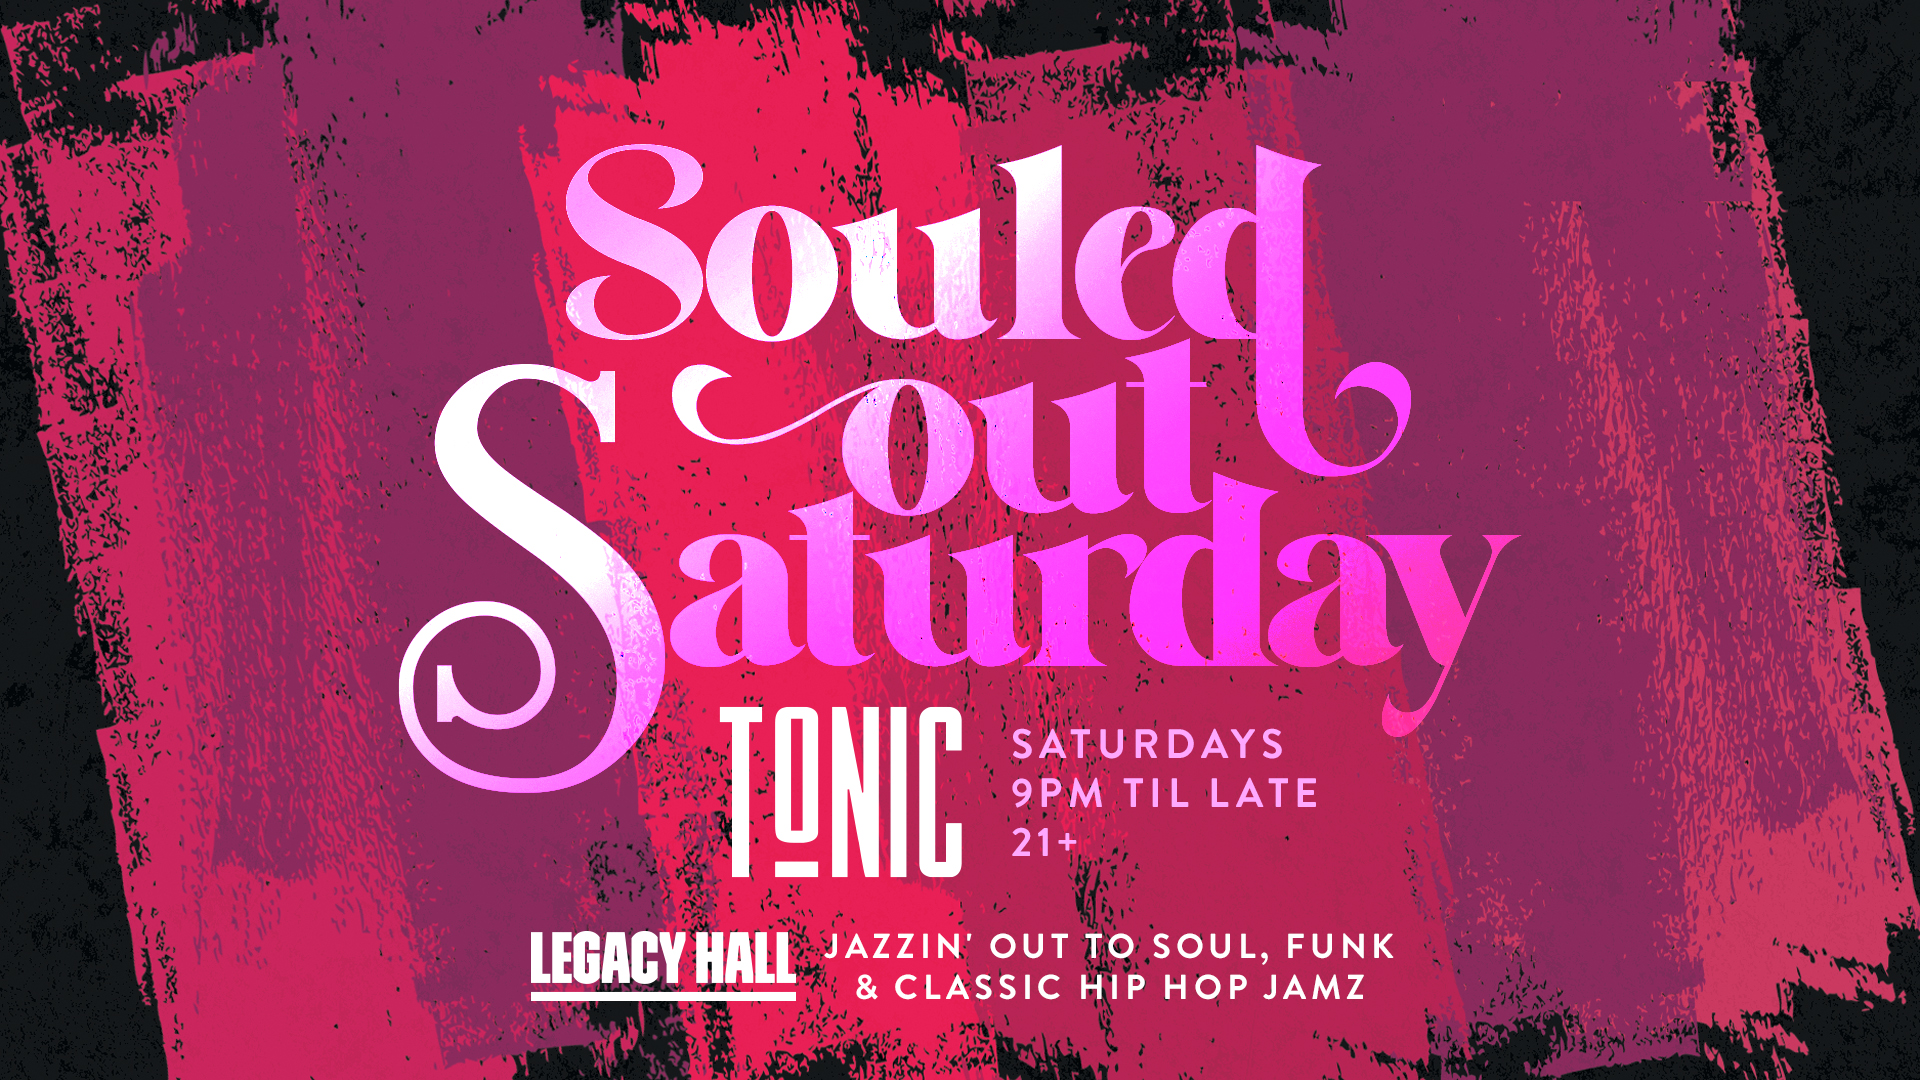 Promo image of Souled Out Saturdays